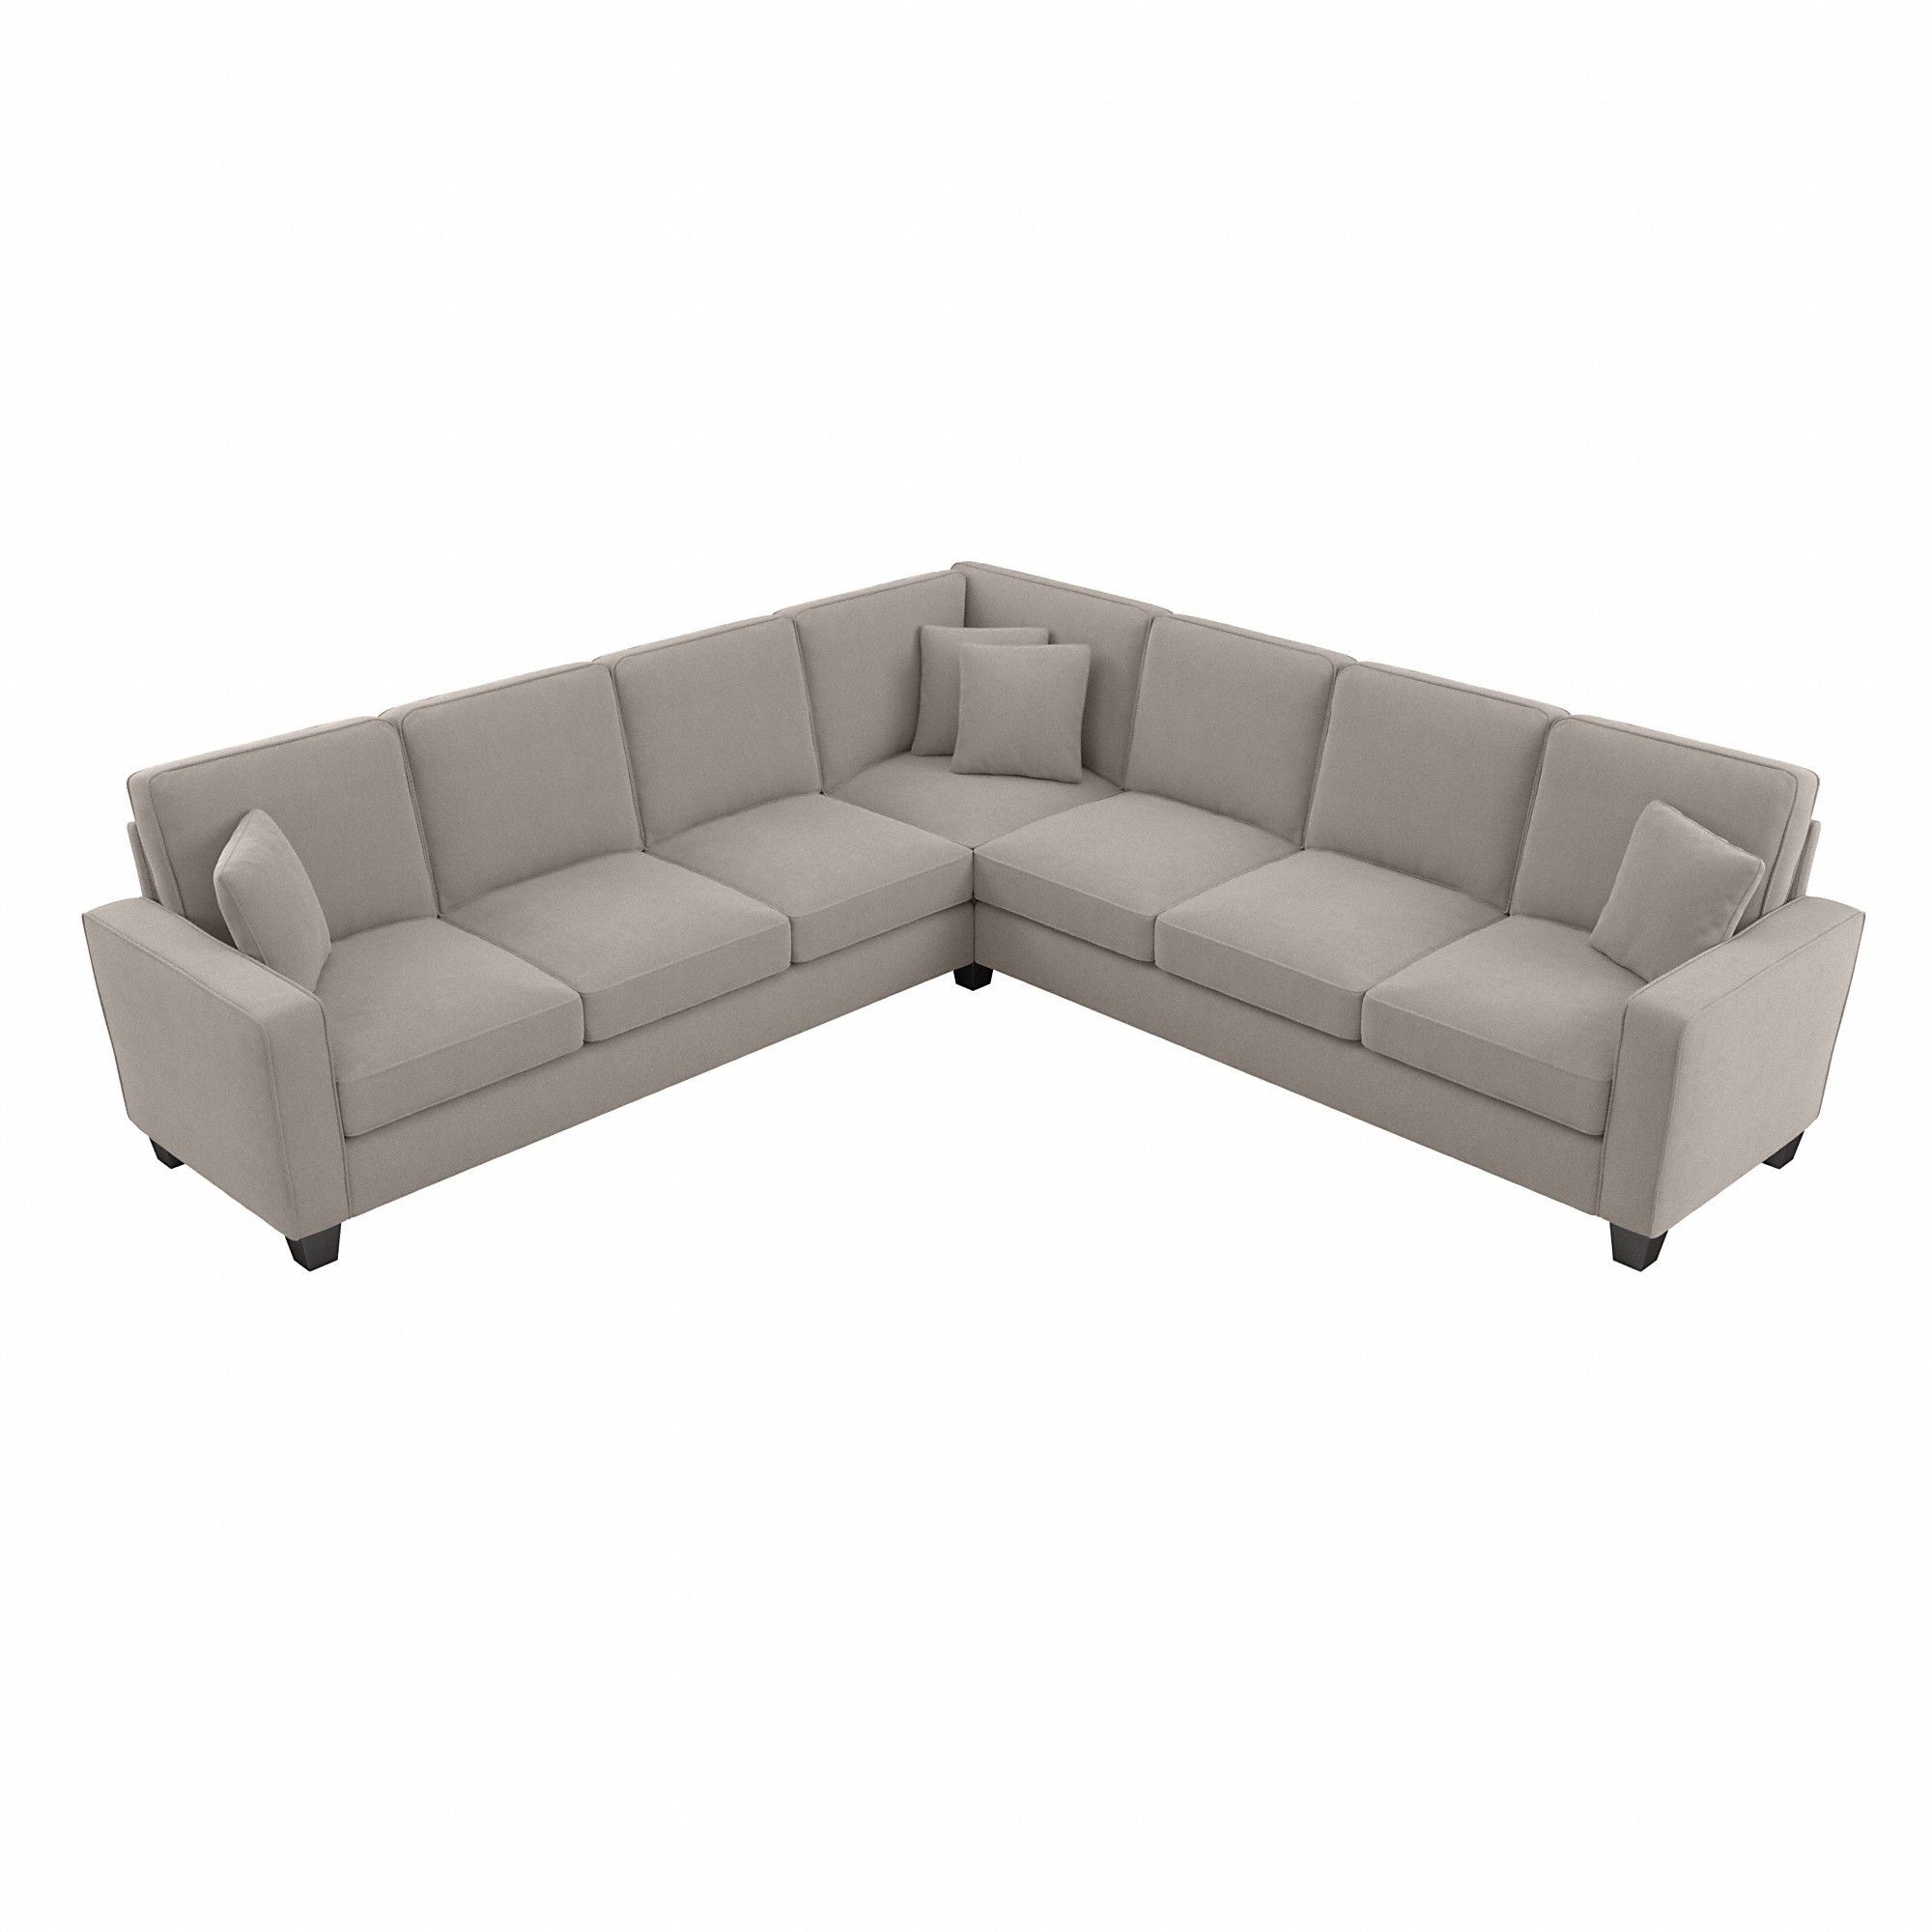 Furniture Stockton 110w L Shaped Sectional Couch In Beige Herringbone Intended For Well Known Beige L Shaped Sectional Sofas (View 7 of 15)